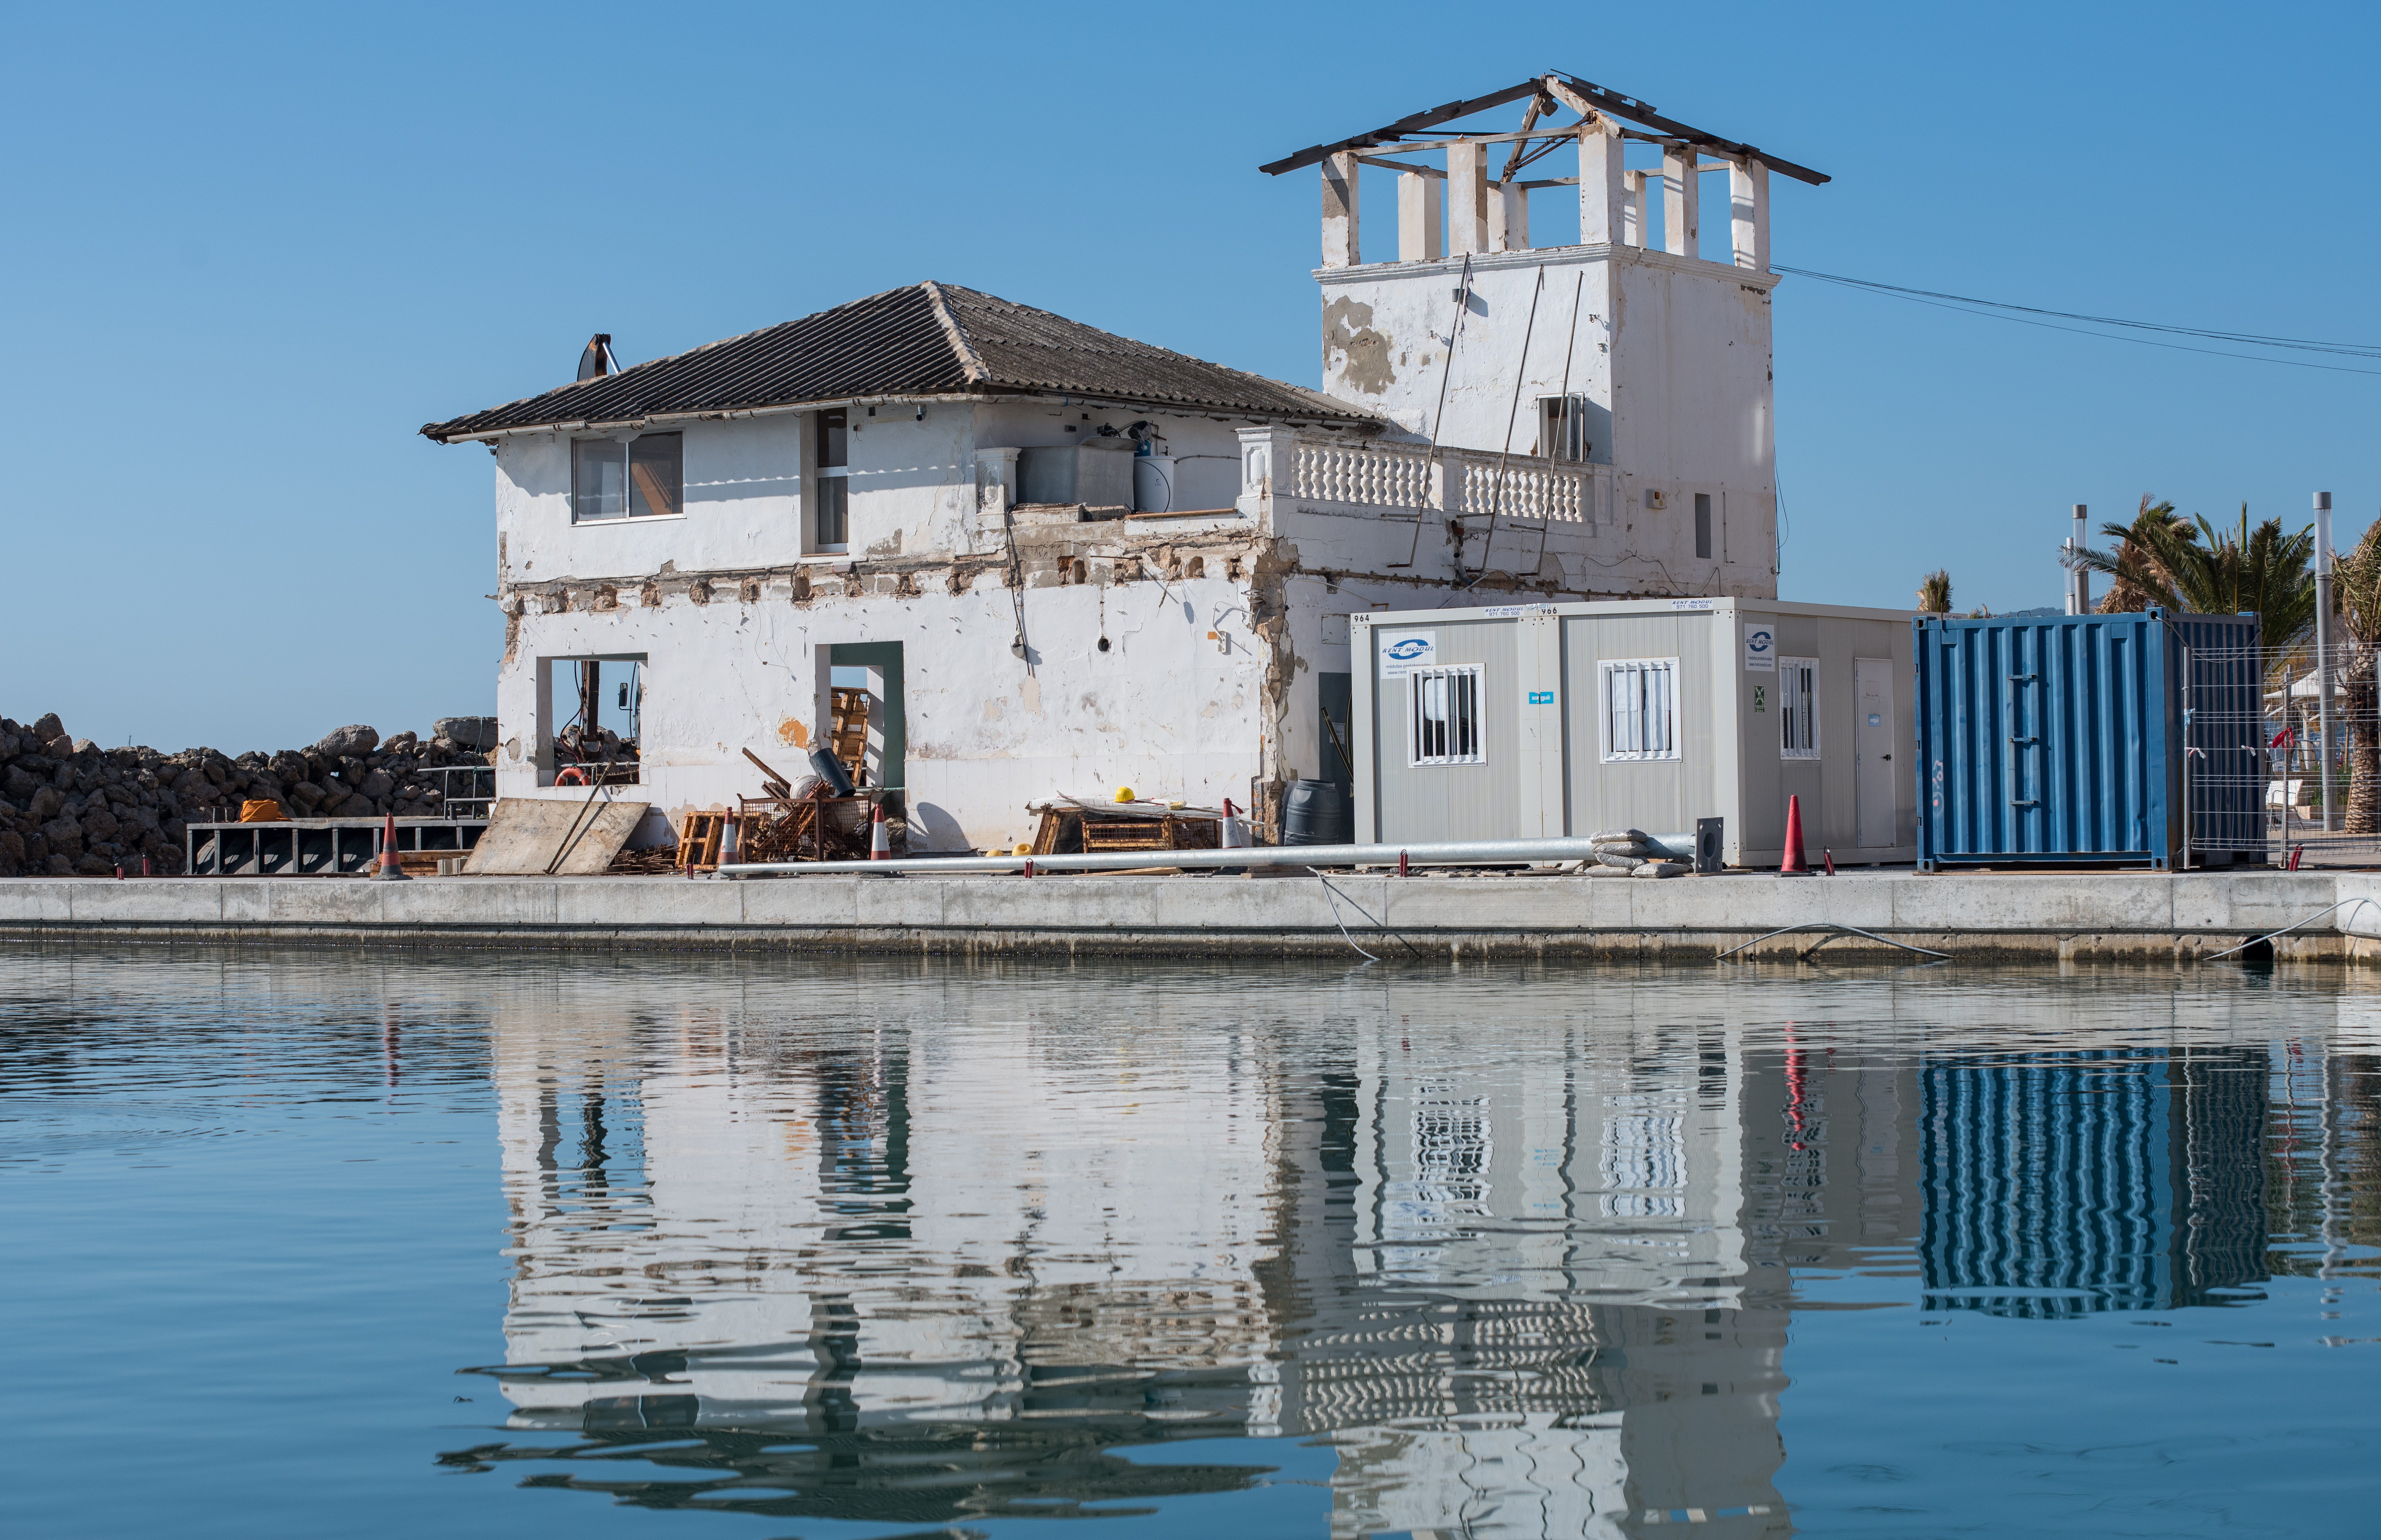 Work has started on the construction of the Molinar de Levante marina building